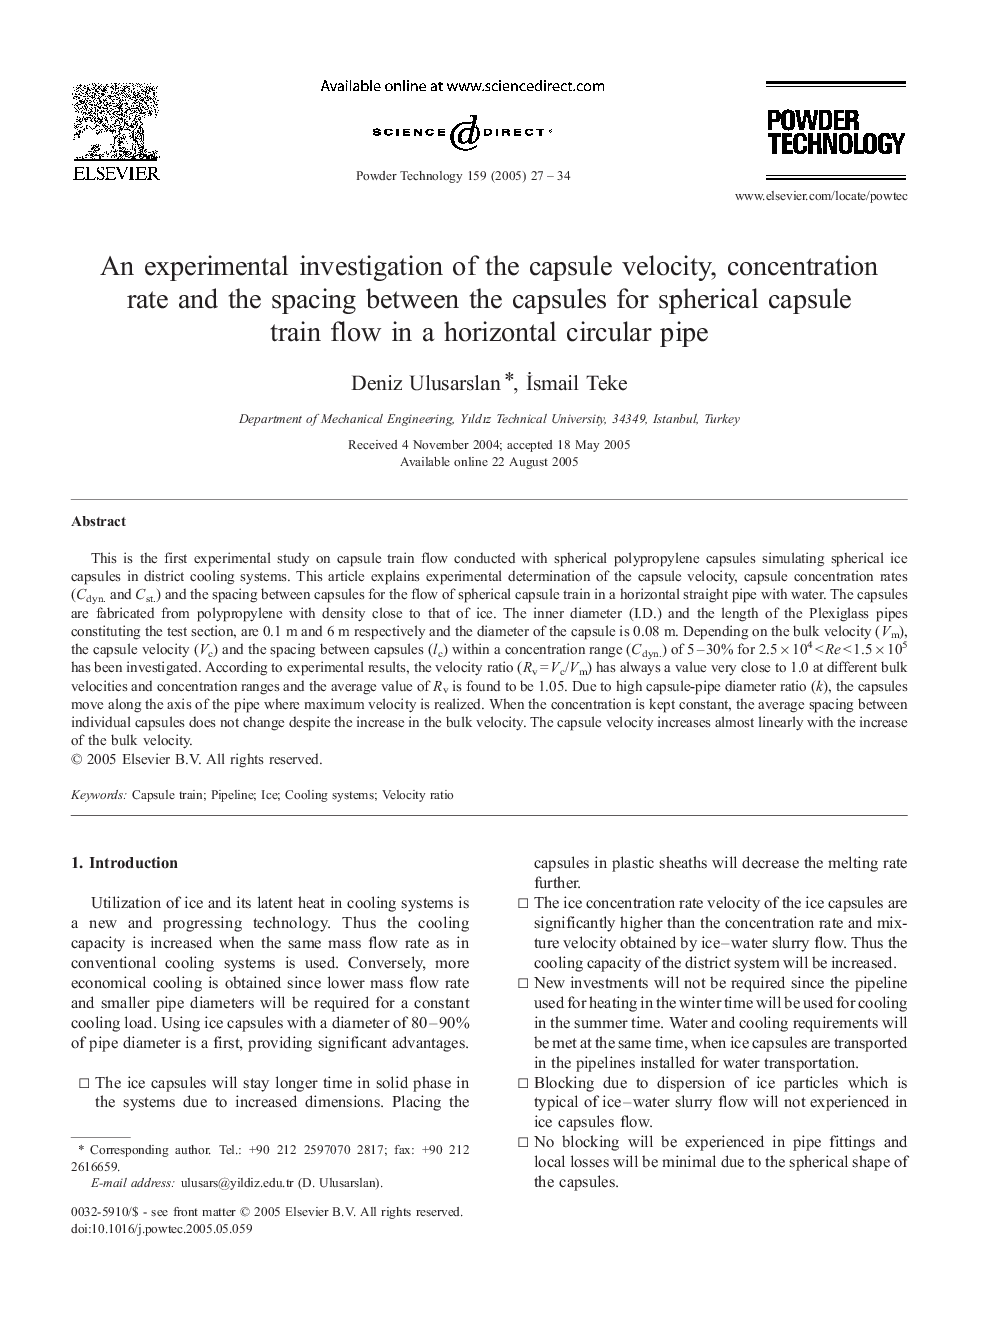 An experimental investigation of the capsule velocity, concentration rate and the spacing between the capsules for spherical capsule train flow in a horizontal circular pipe